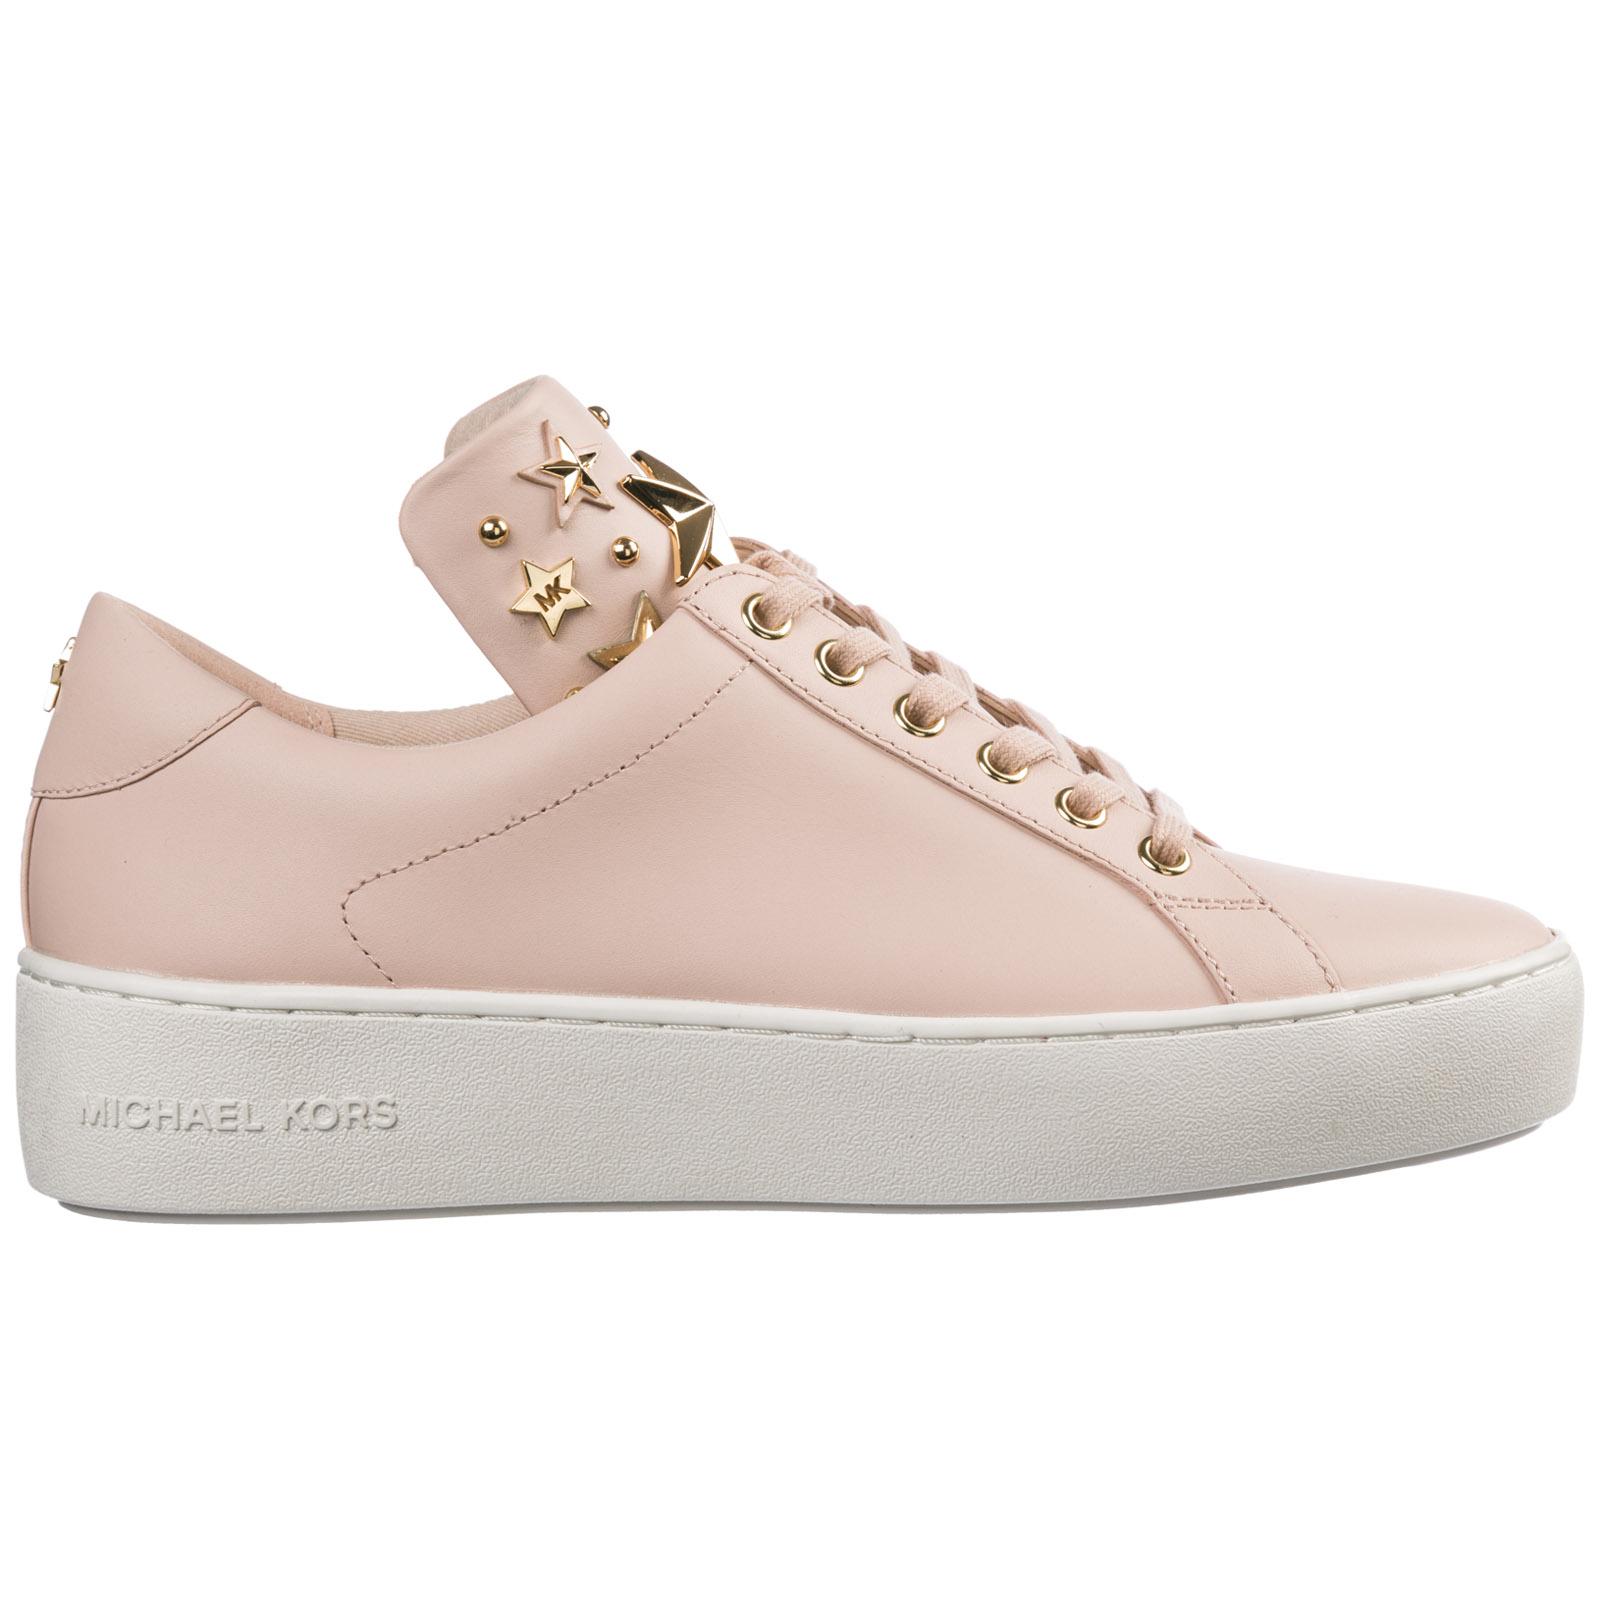 Michael Kors Women's Shoes Leather Trainers Sneakers in